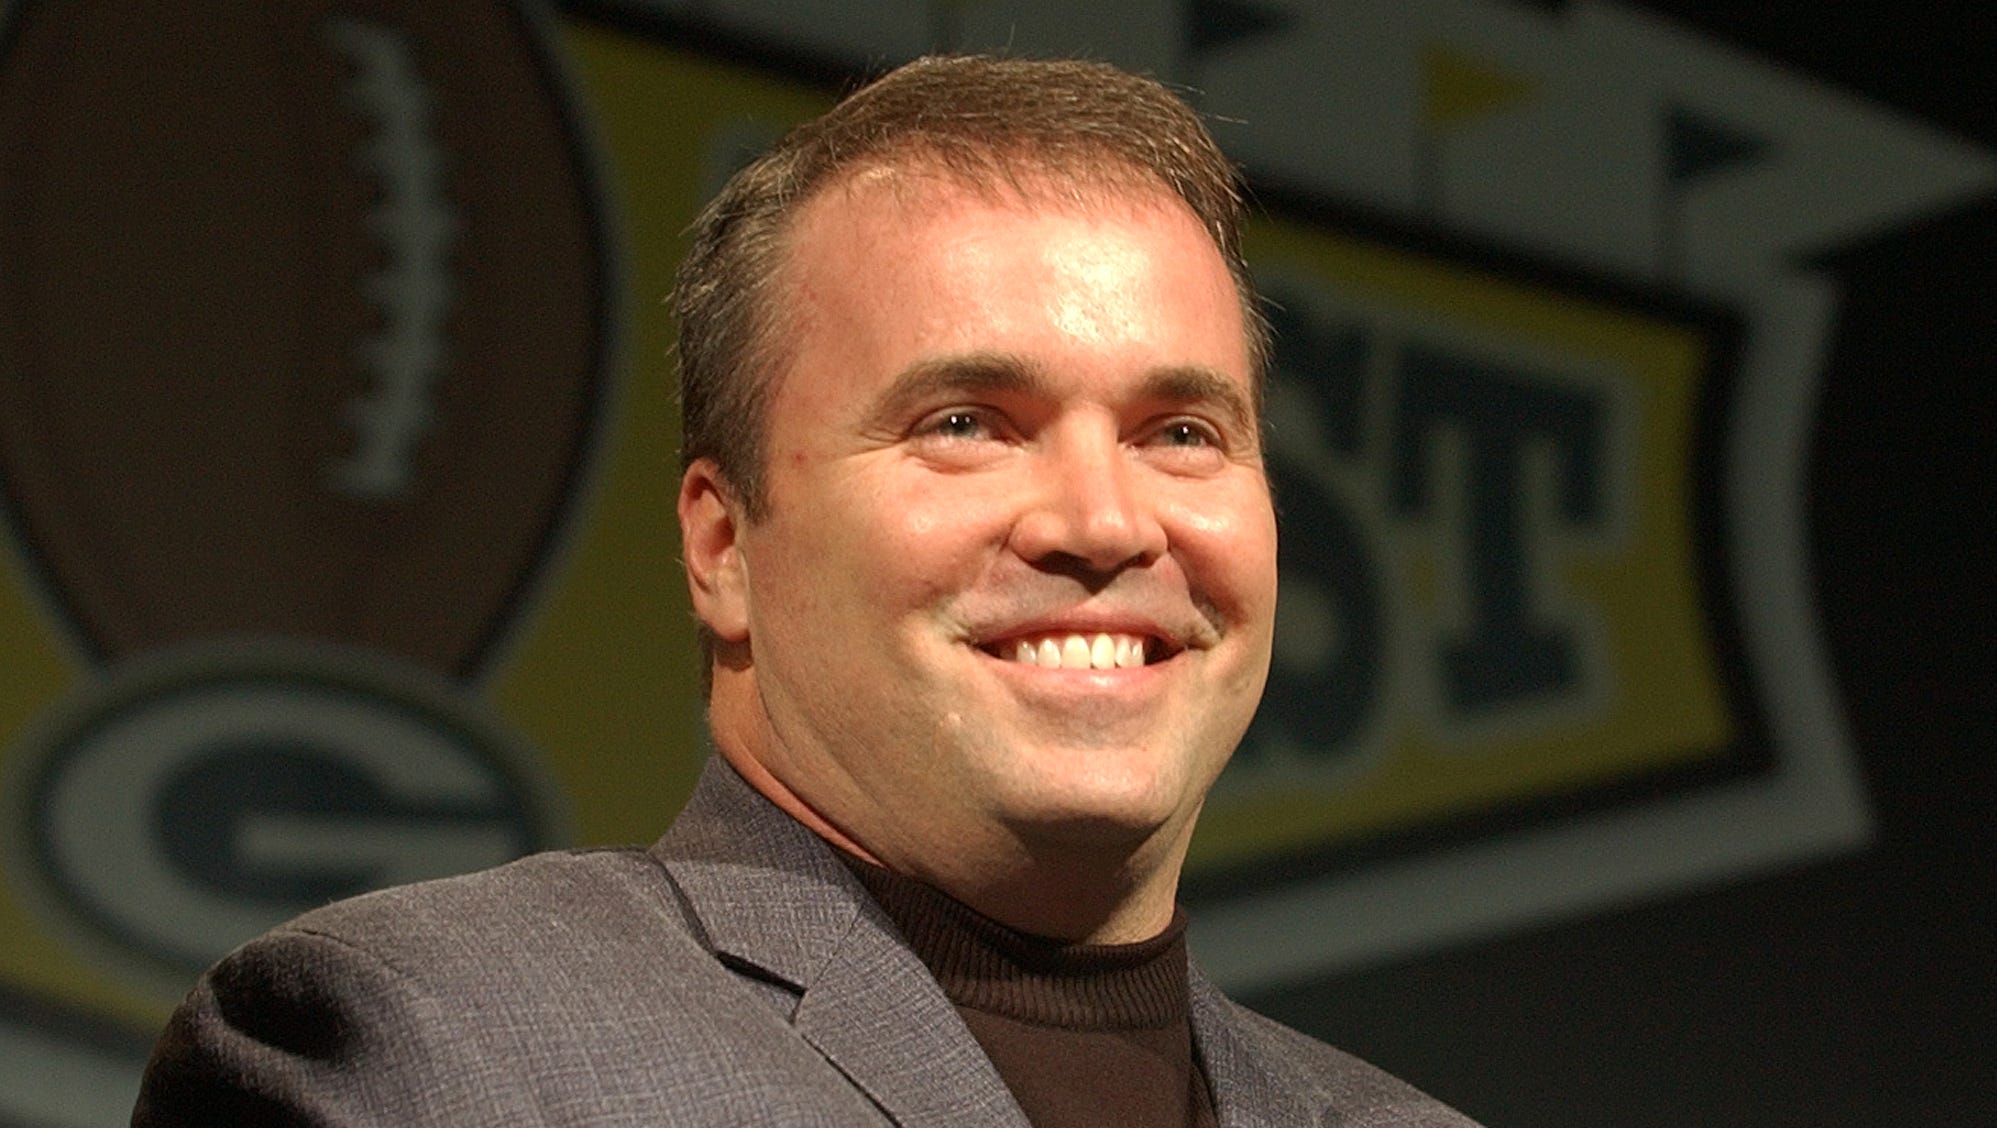 Packers coach Mike McCarthy smiles at the crowd during Fan Fest in the Lambeau Field Atrium.